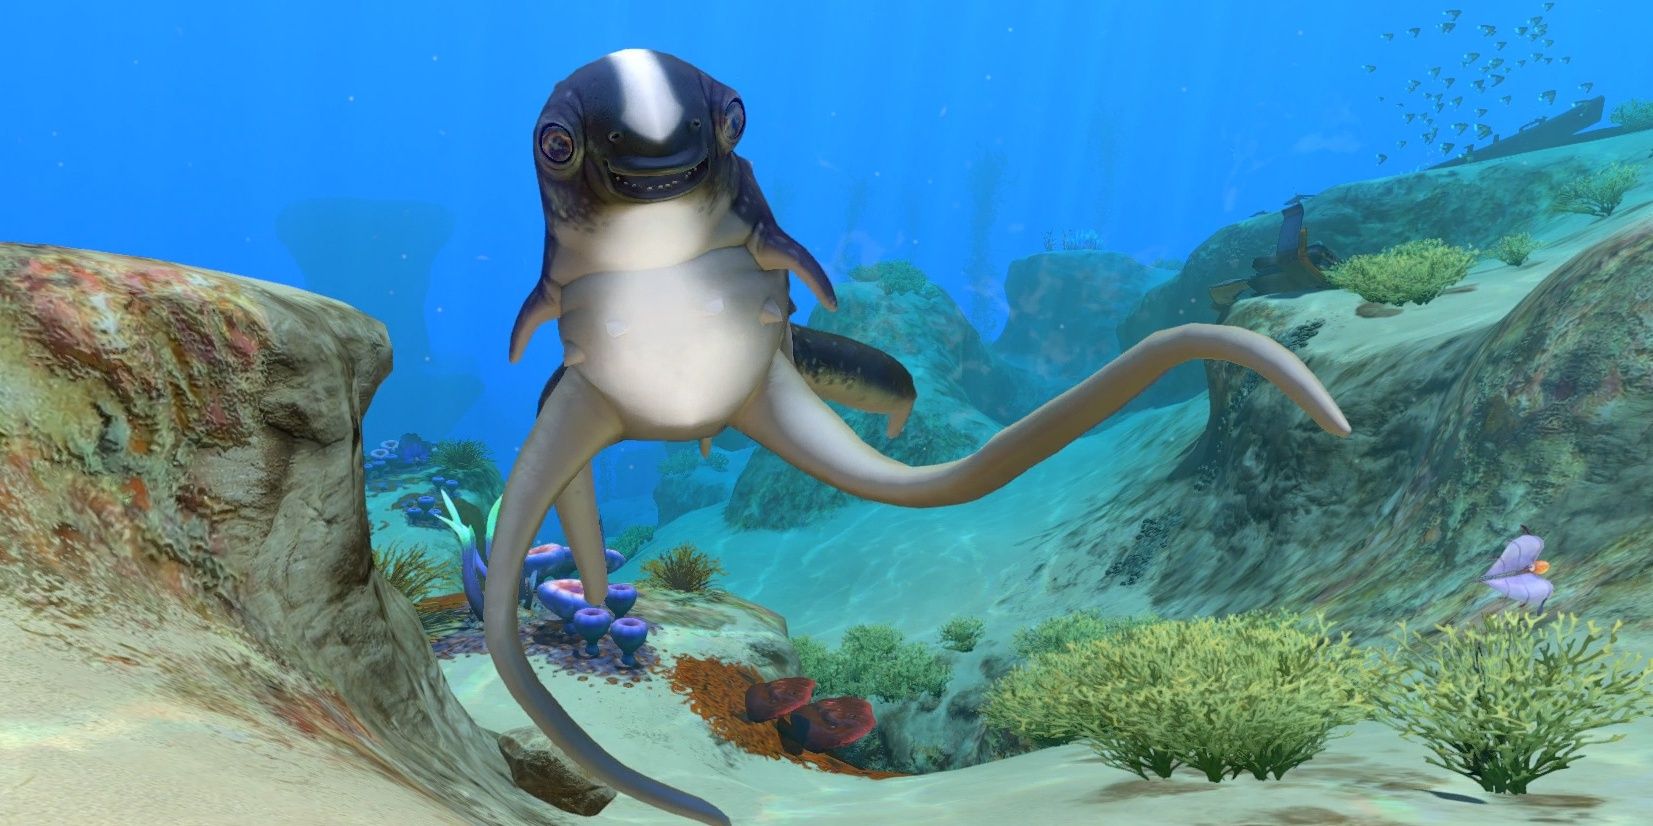 subnautica early access started